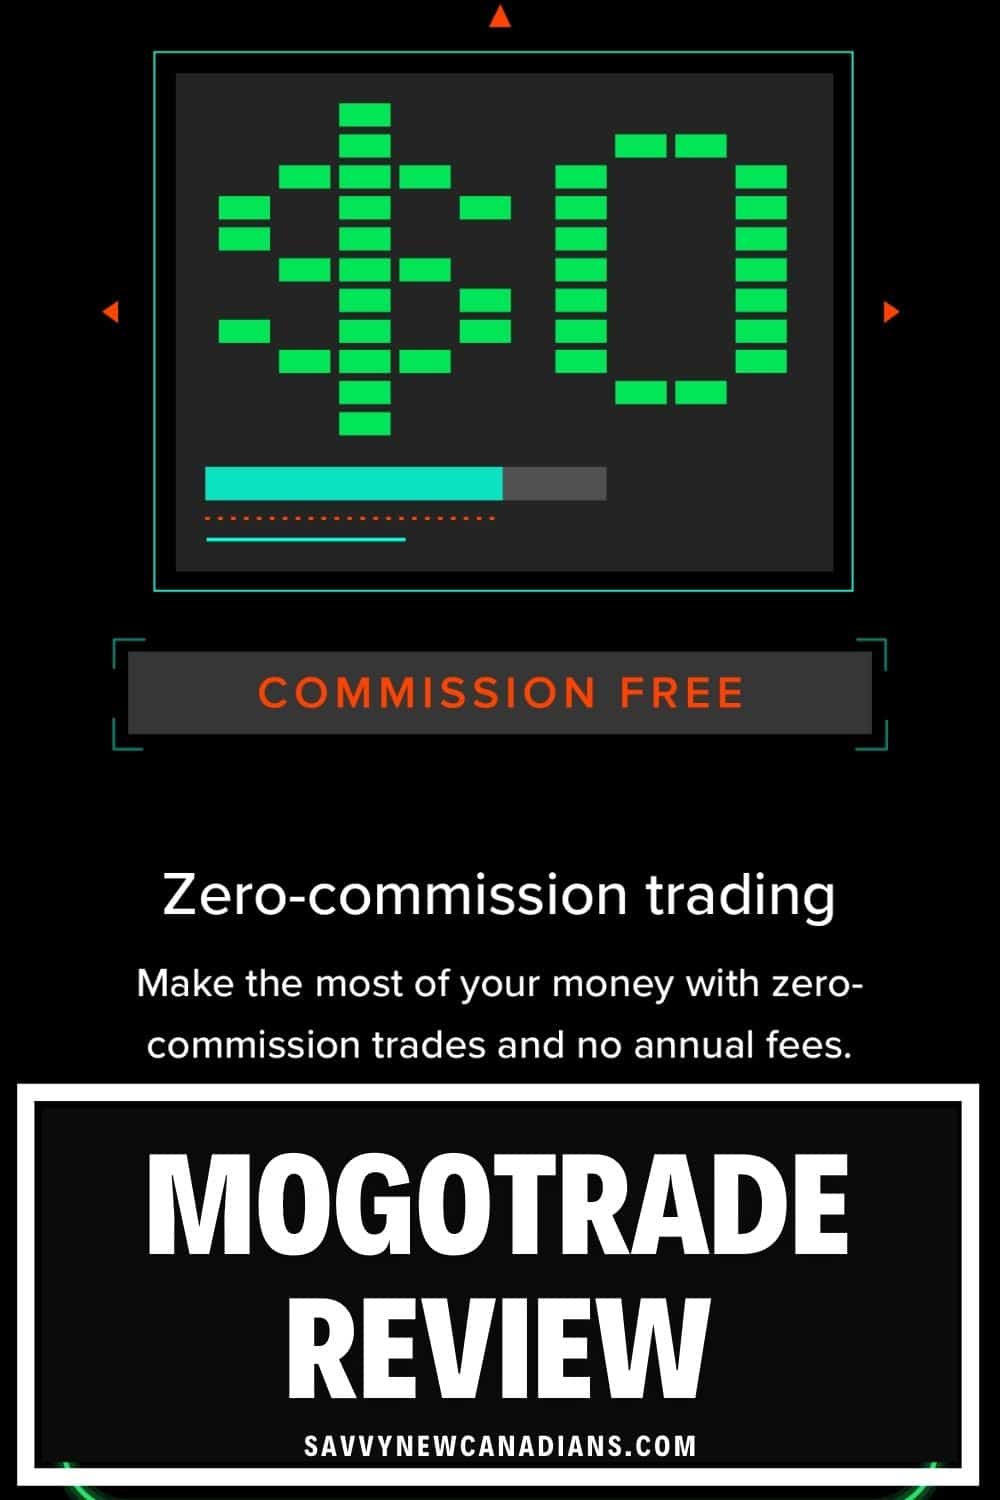 MogoTrade Review: Commission-Free Stock Trading App for Canadians